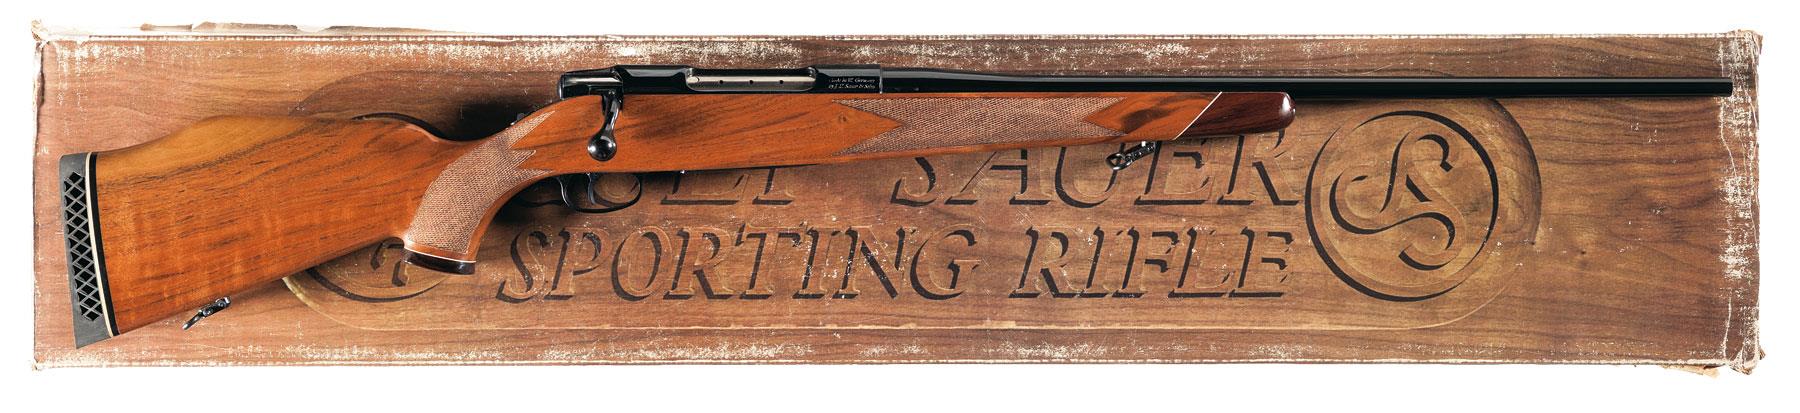 Colt Sauer Sporting Bolt Action 270 Winchester Rifle With Box